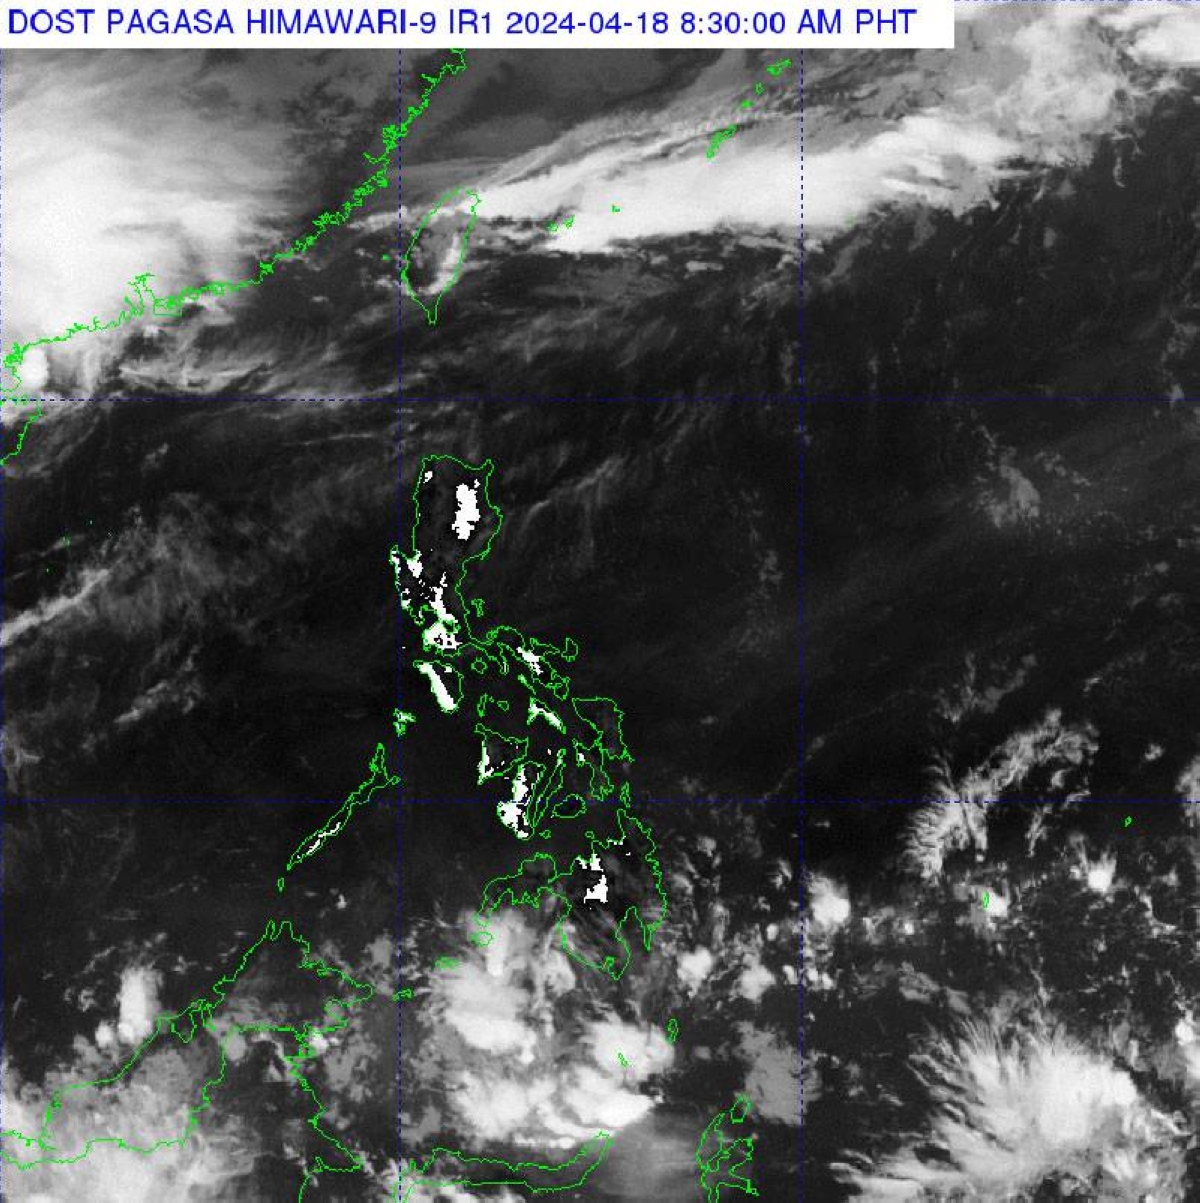 palawan, pangasinan to hit 45 c as ph sweats for rest of the week